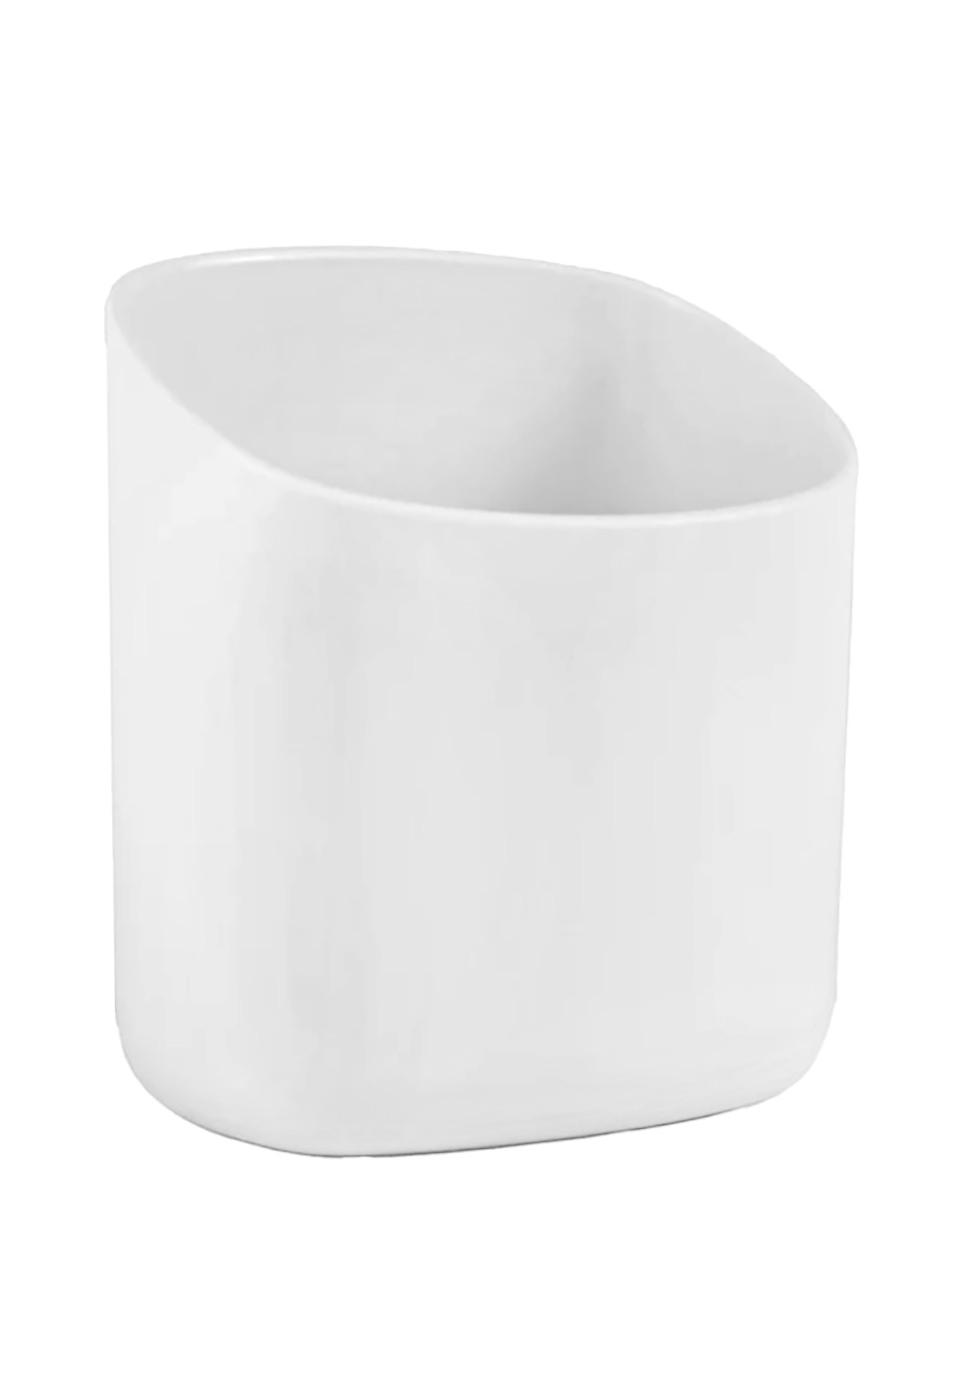 Honey Can Do Perch Bitsy Magnetic Container - White; image 1 of 3